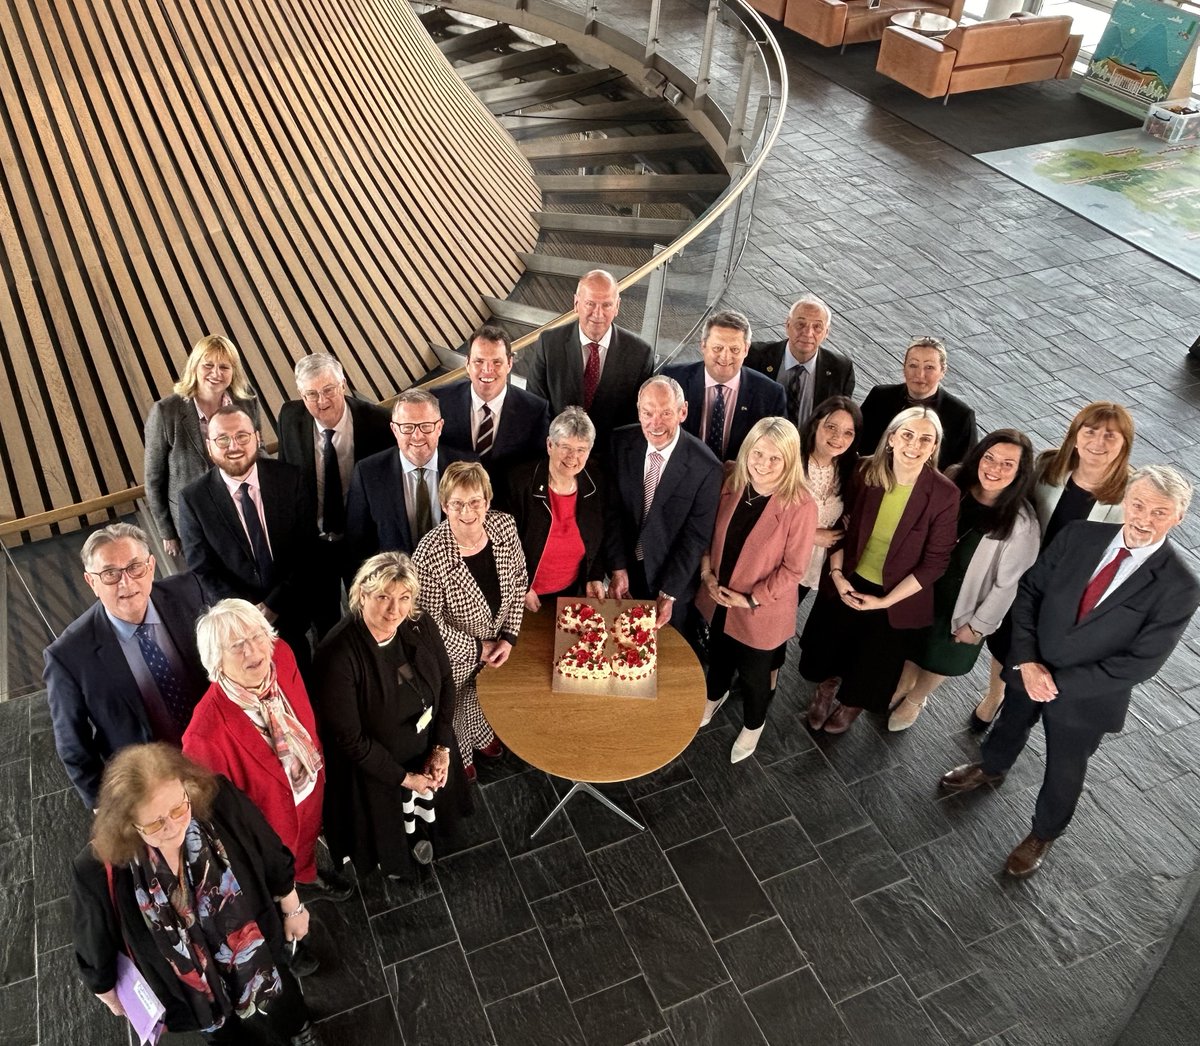 Happy birthday to @SeneddWales 🏴󠁧󠁢󠁷󠁬󠁳󠁿🎂 Proud to celebrate 25 years of devolution alongside some of my fellow @WelshLabour MSs. #Senedd25